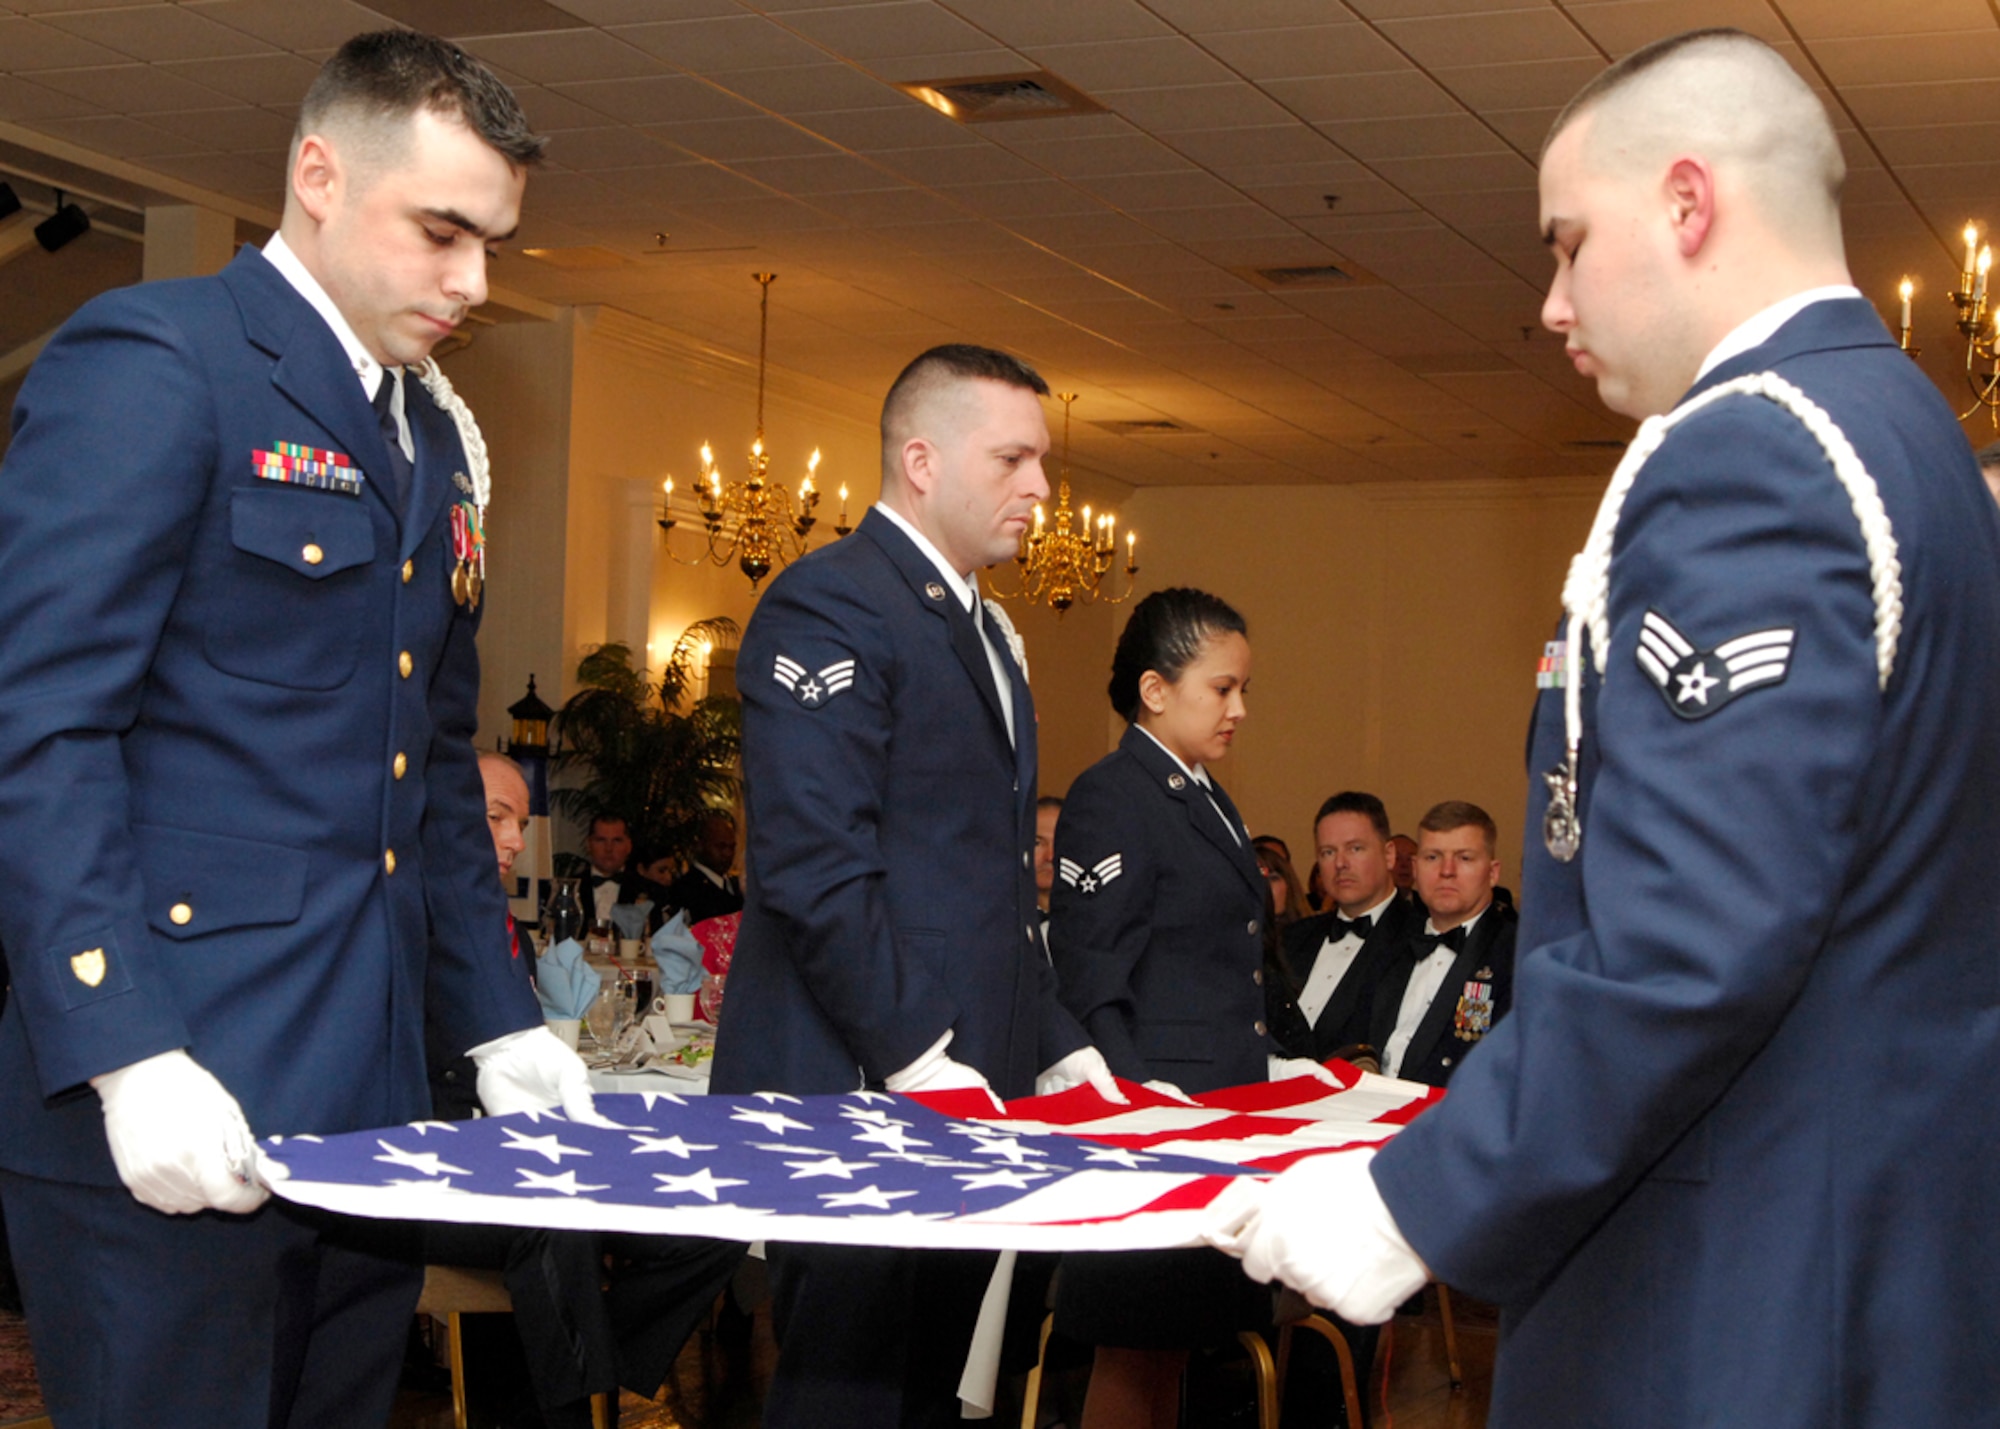 HANSCOM AFB, Mass. -- Members of the recent Airman Leadership School class participate in a flag folding ceremony during their graduation ceremony Feb. 15 at the Minuteman Club. ALS is a five-week course and the first step of Professional Military Education for all enlisted Airmen. The course is required to be taken in residence by active-duty servicemembers prior to being promoted to the rank of staff sergeant and is a requirement for all Airmen to be a rater on Enlisted Performance Reports. U.S. Air Force photo by Mark Wyatt